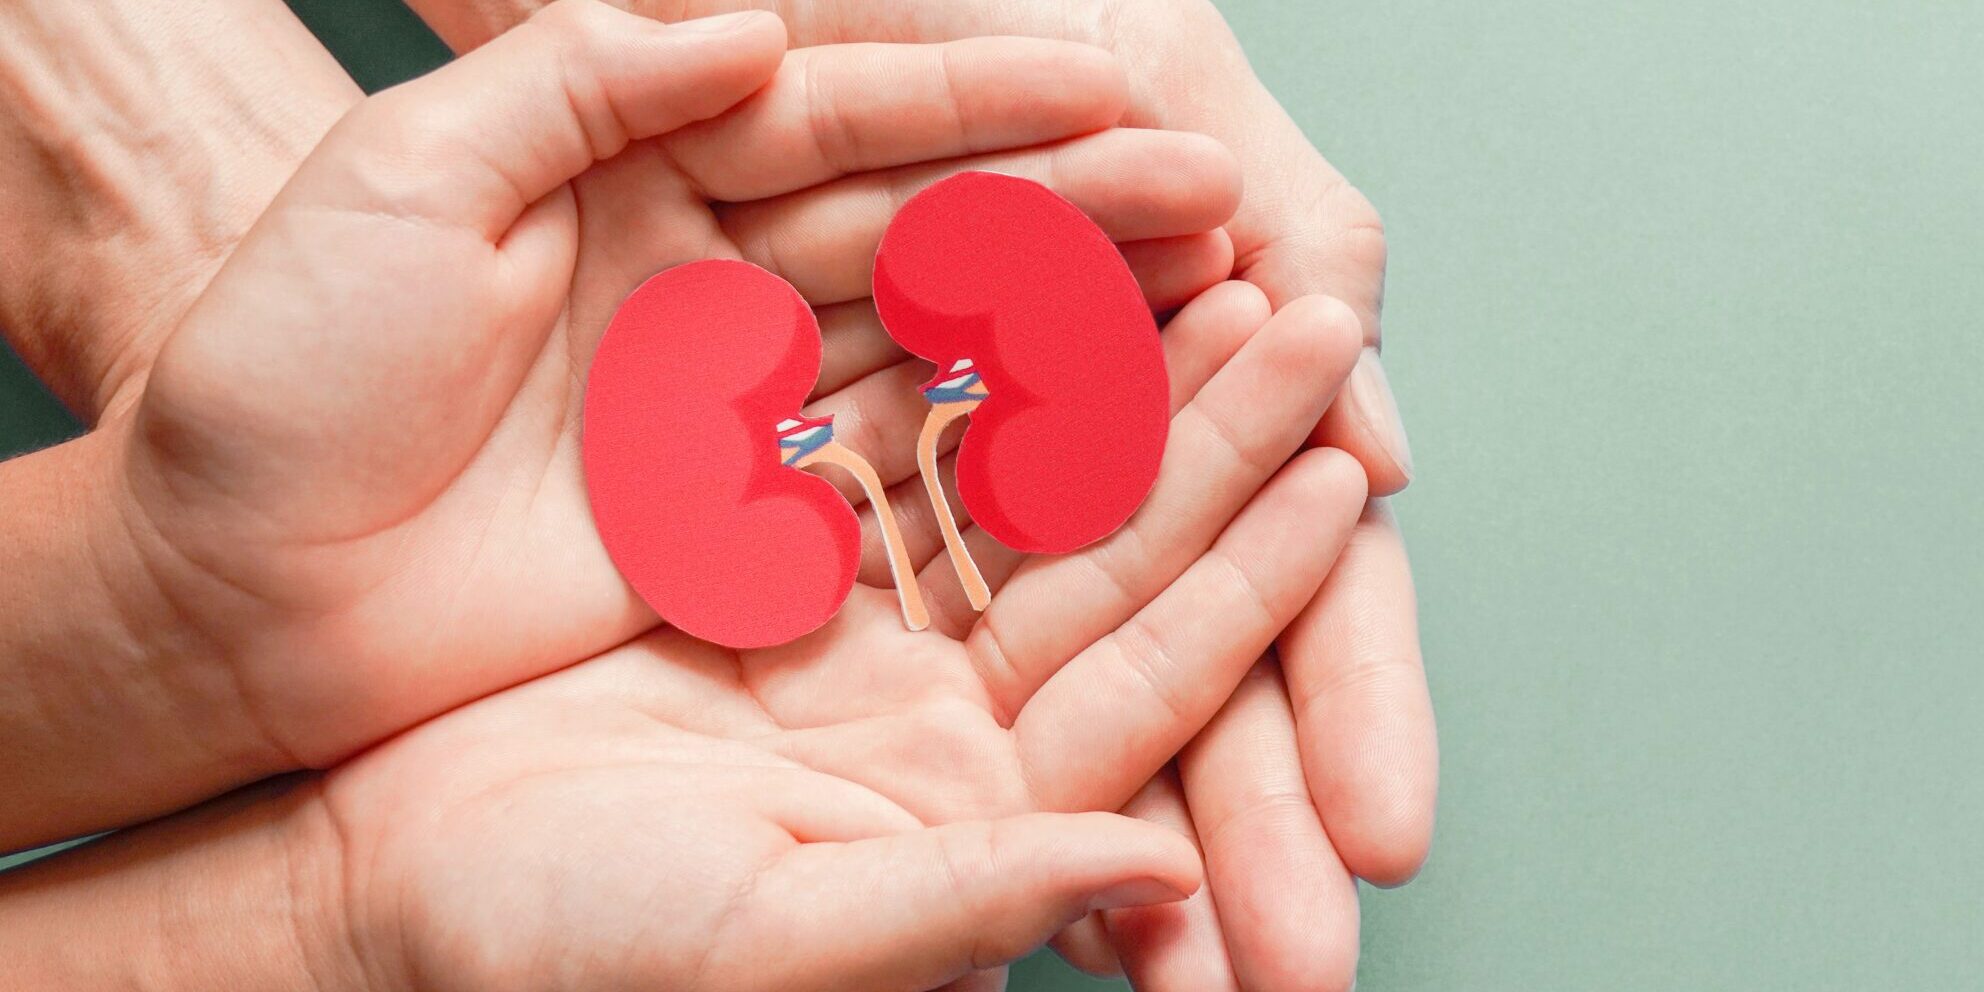 Adult And Child Holding Kidney Shaped Paper On Textured Blue Bac